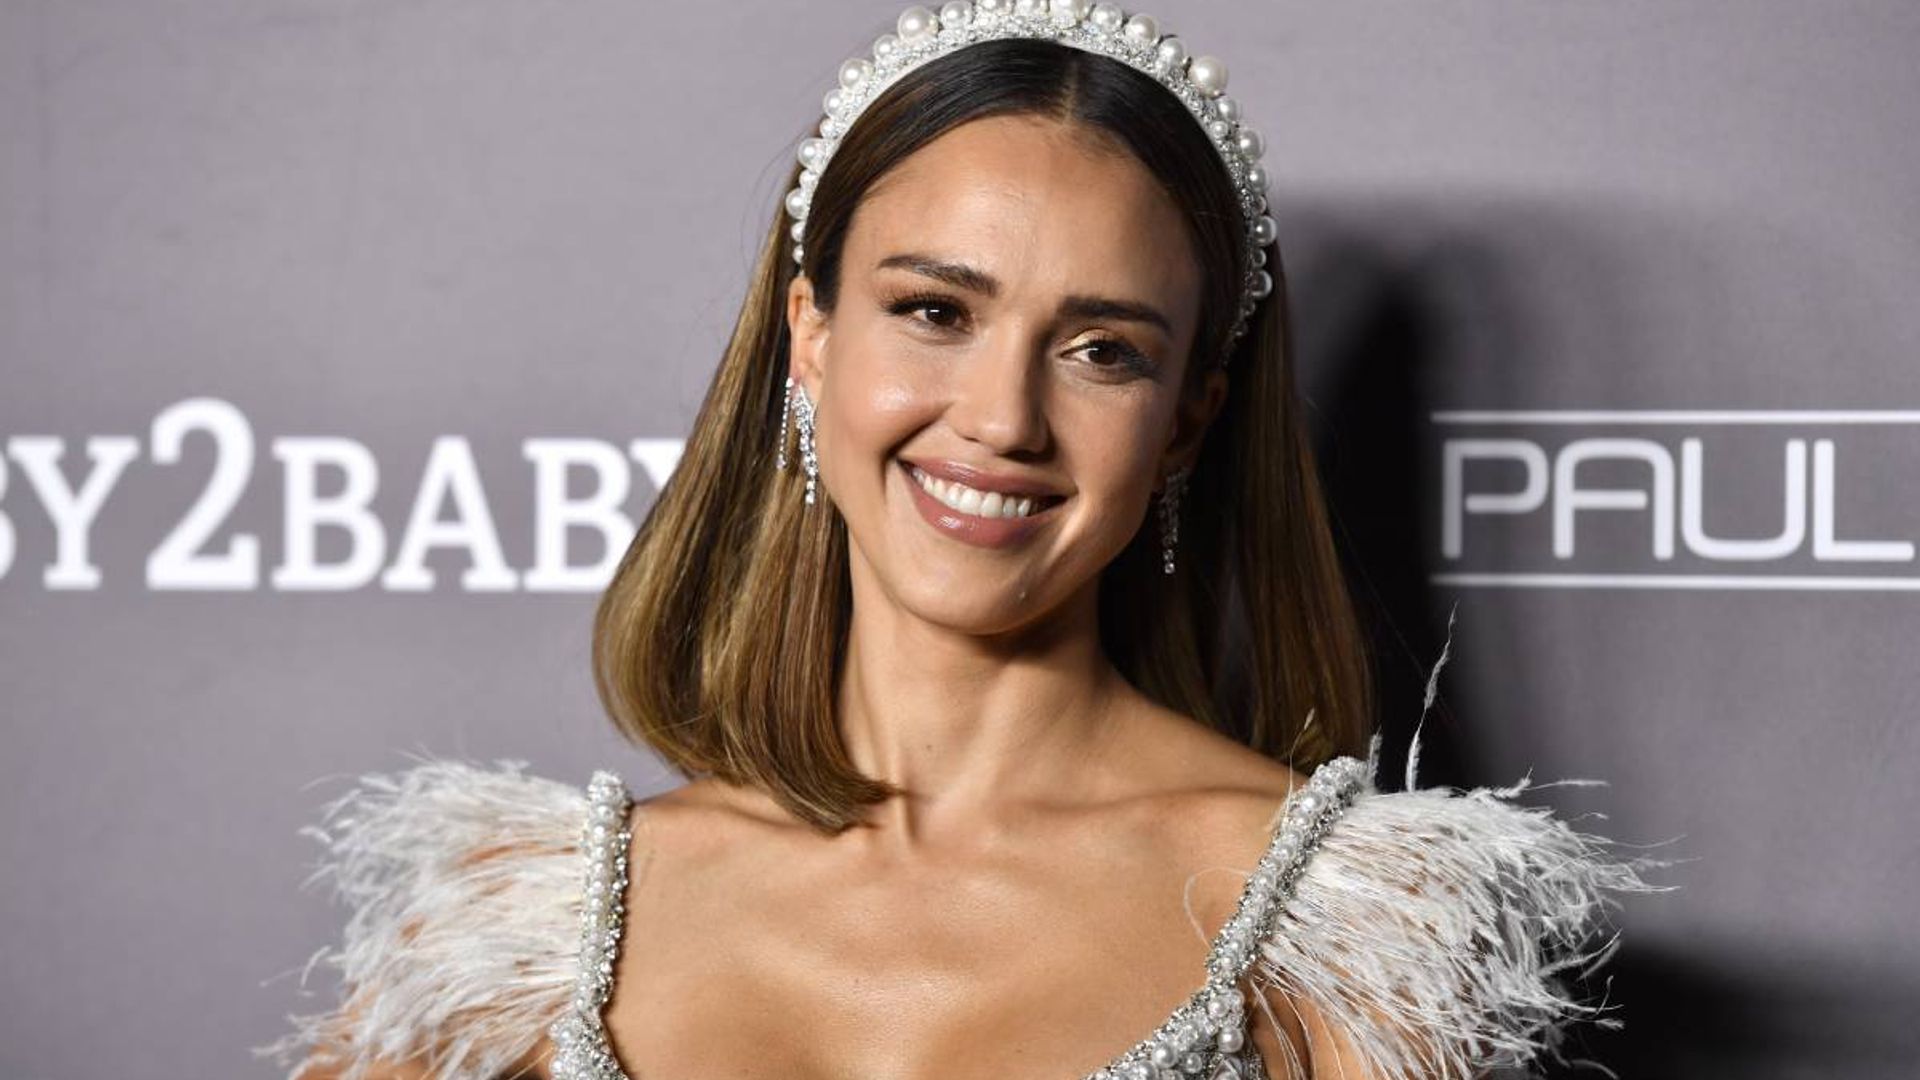 Jessica Alba and her daughter are twinning in floral dresses - and she looks so grown up